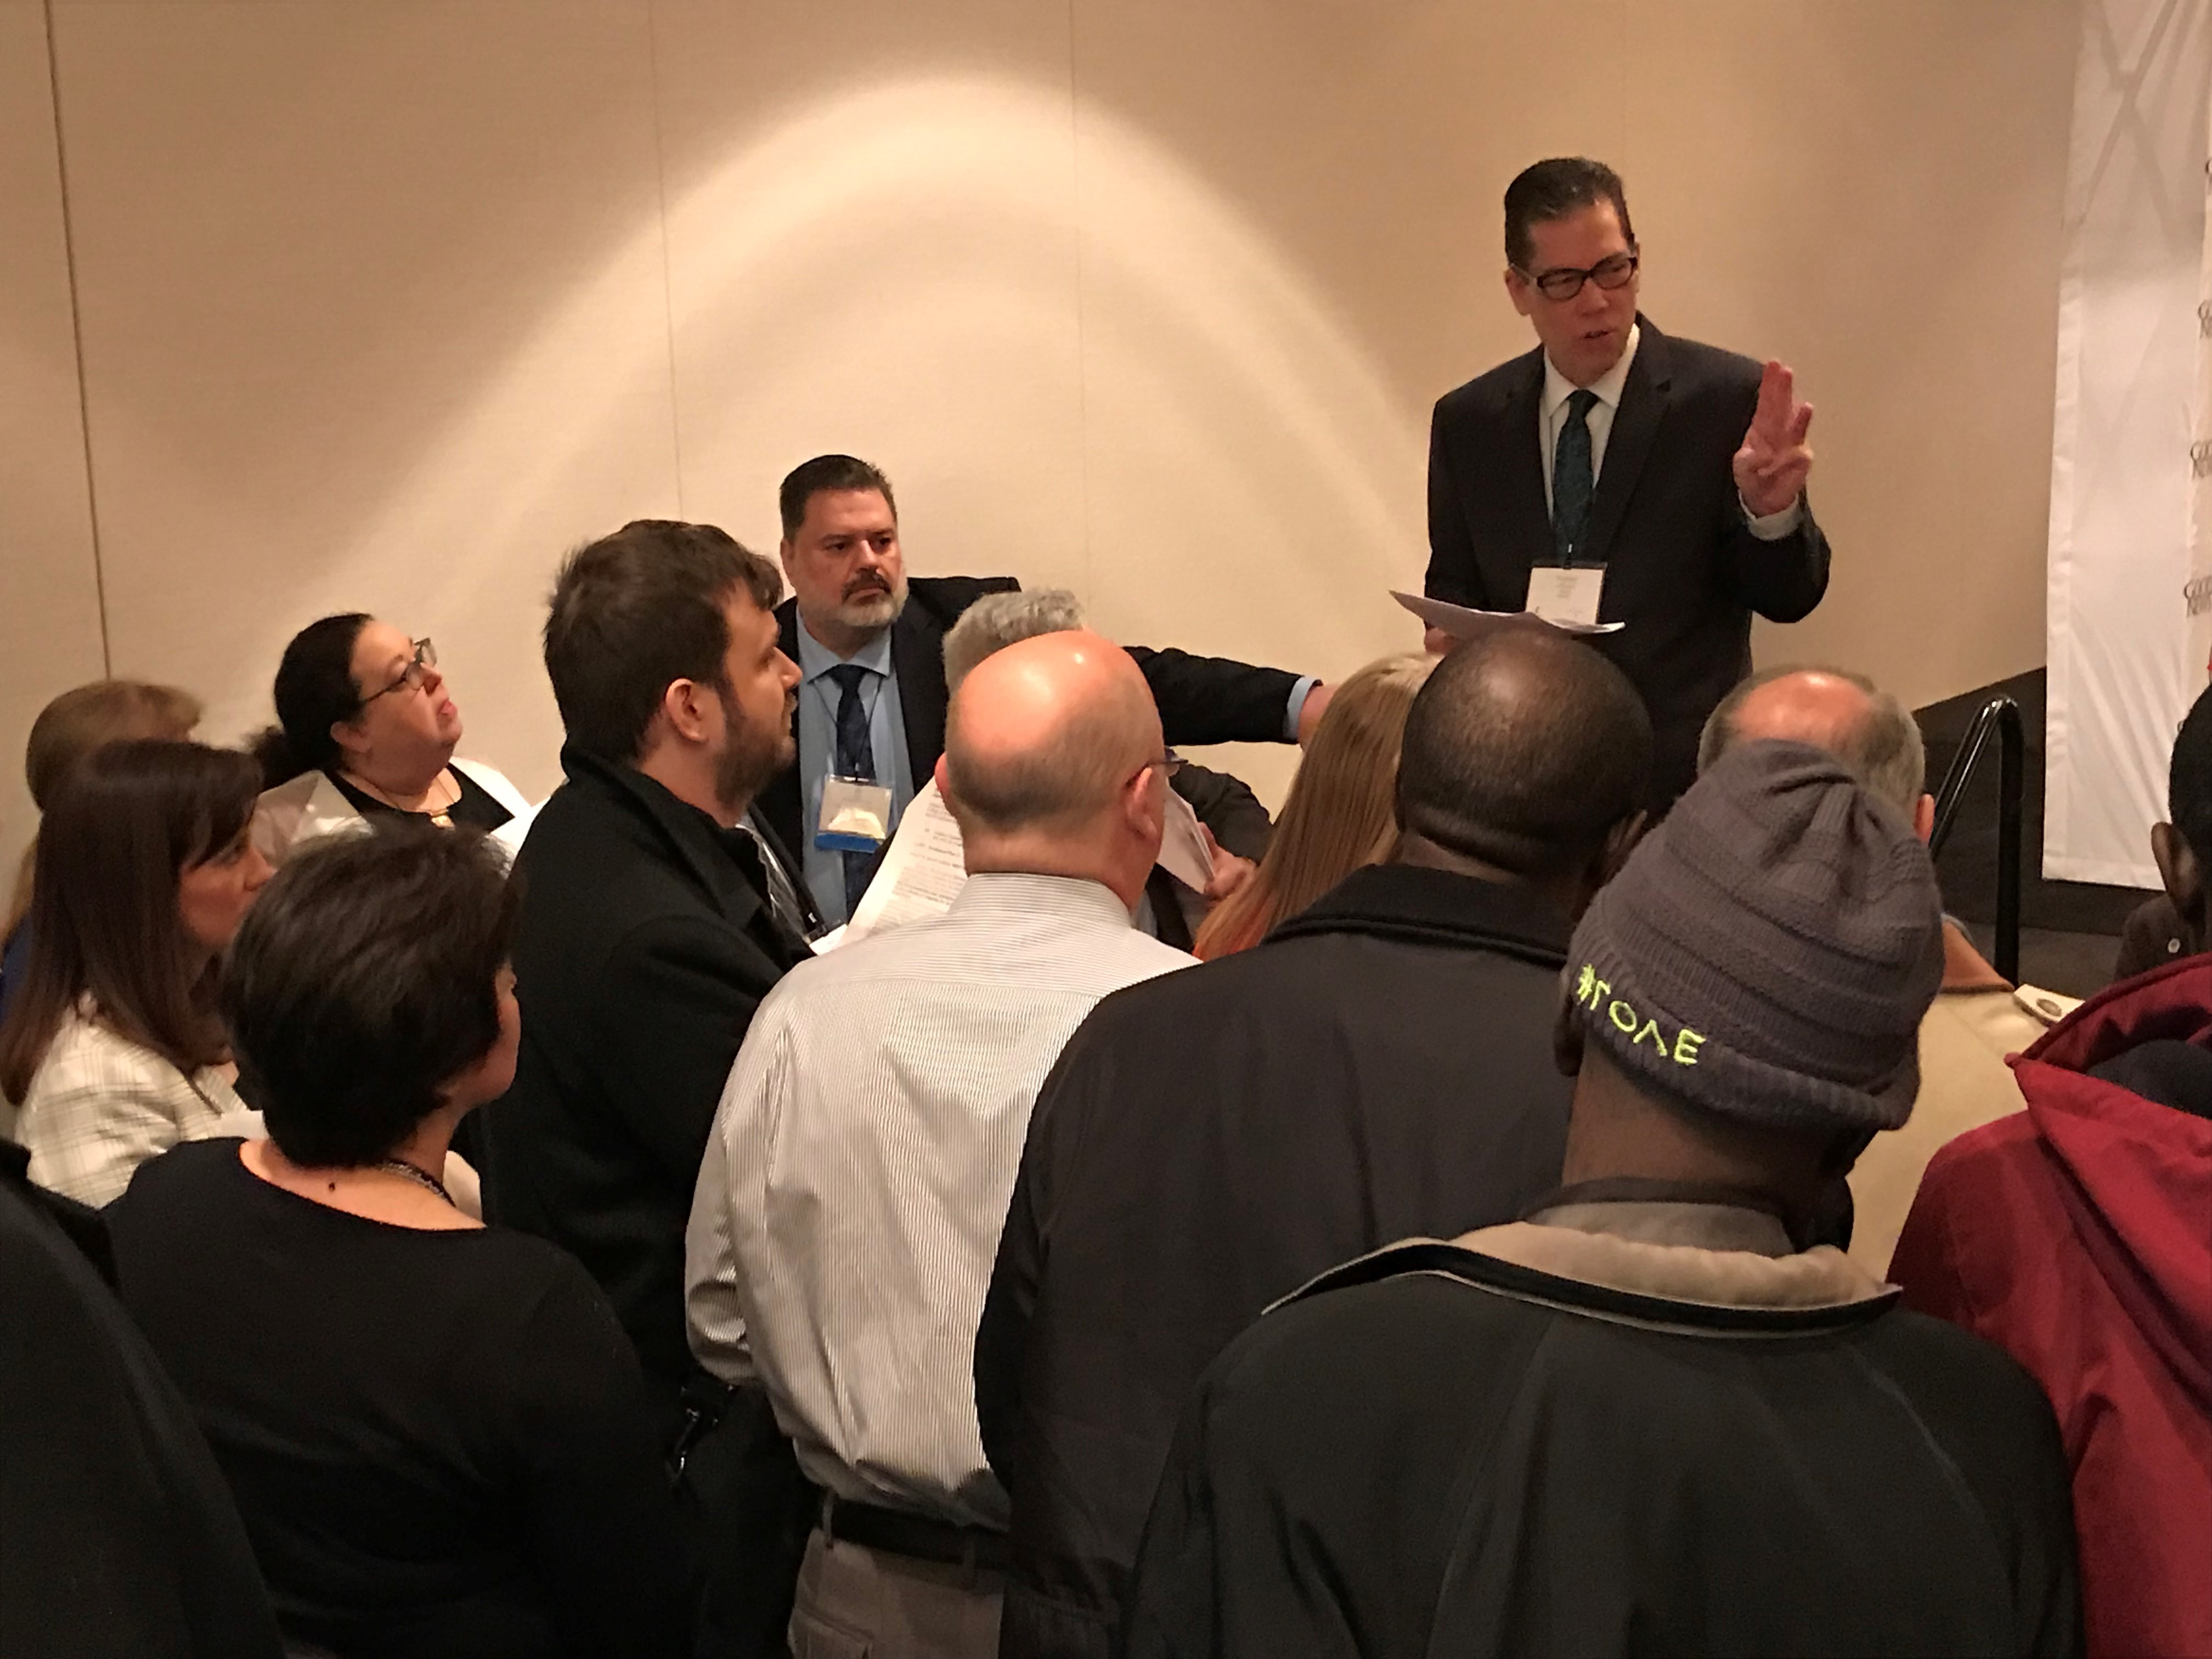 The Rev. Tom Lambrecht gives directions to General Conference 2019 delegates at the Feb. 25 breakfast briefing sponsored by Good News, the unofficial traditionalist advocacy group within The United Methodist Church. Photo by Sam Hodges, UMNS.